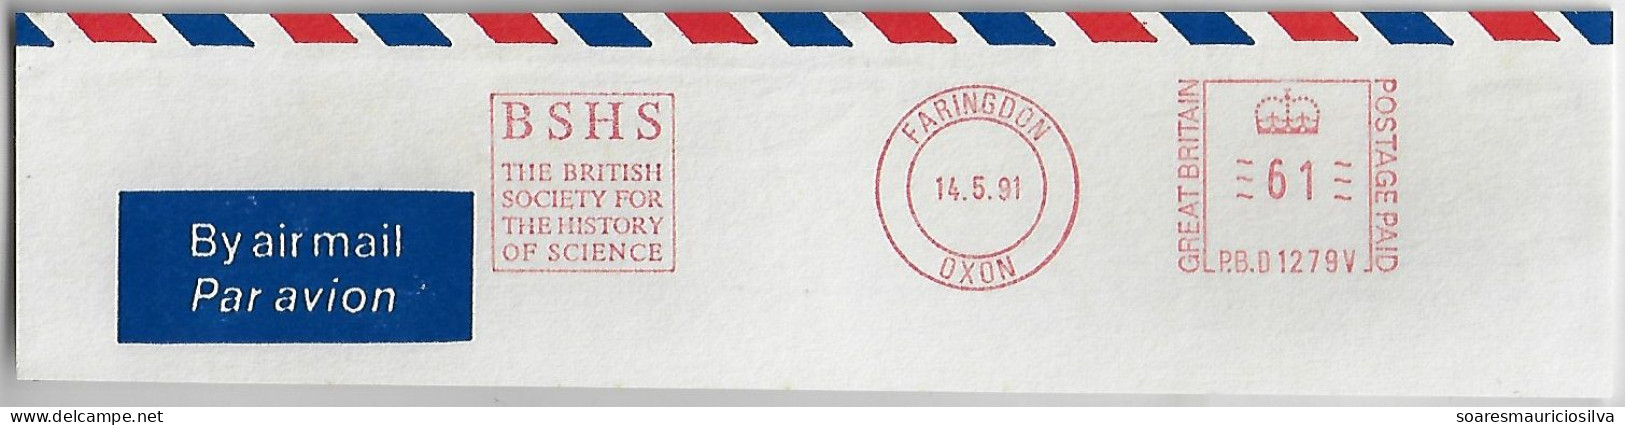 Great Britain 1991 Cover Fragment Meter Stamp Pitney Bowes 6300 Series Slogan British Society For The History Of Science - Covers & Documents